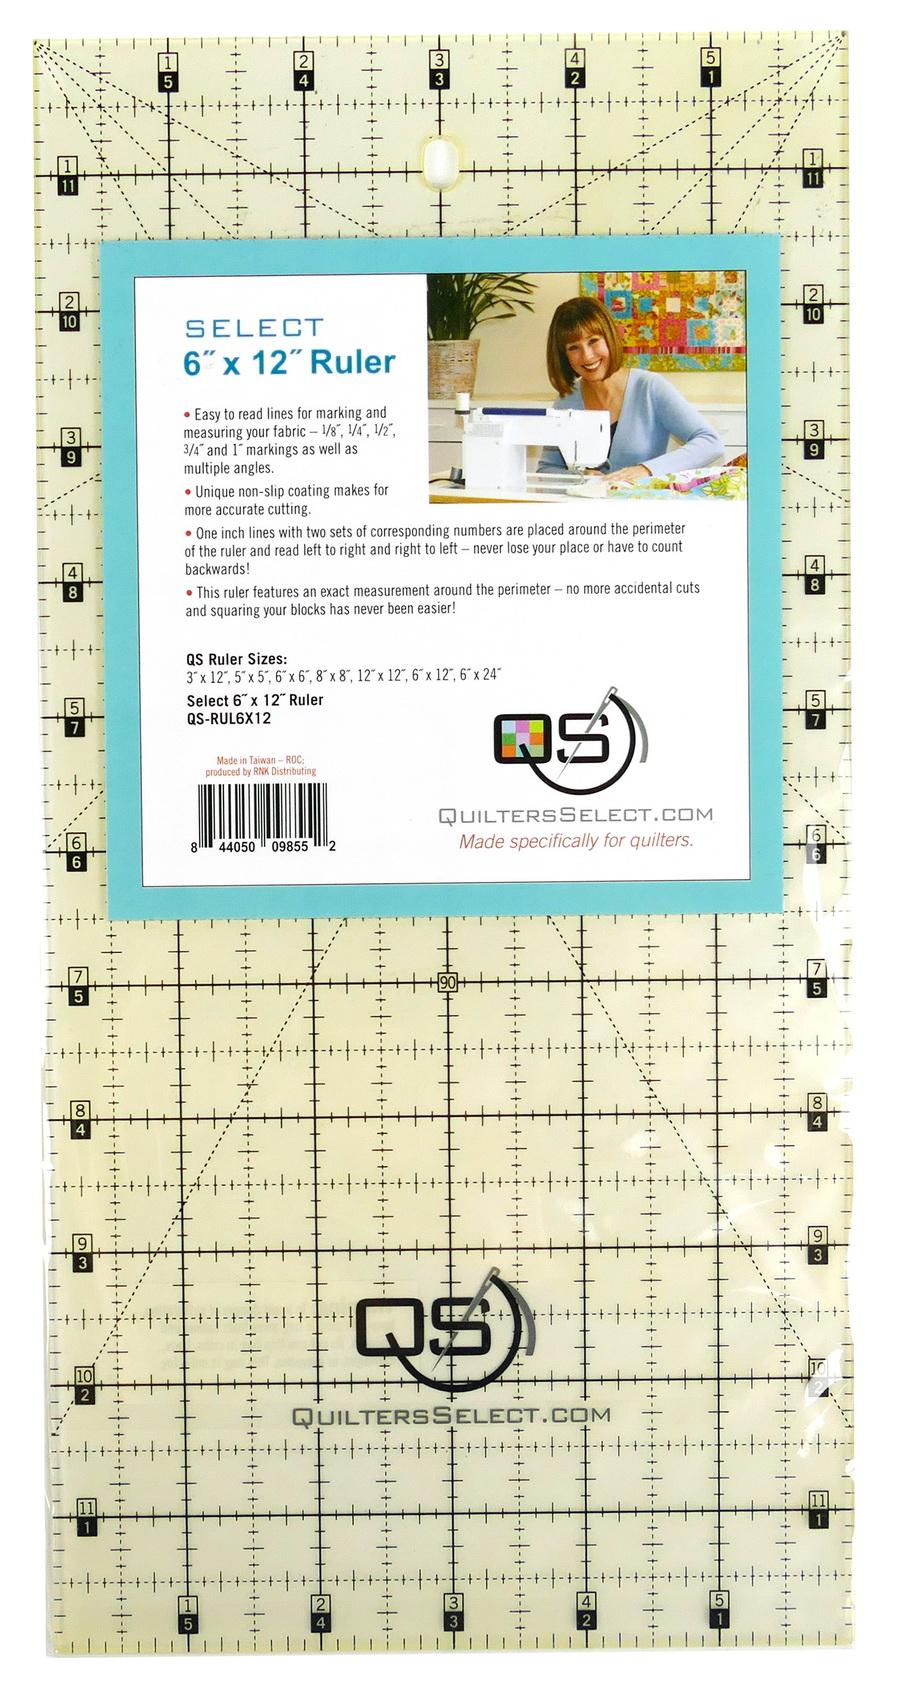 Havel's Square Fabric Ruler 12.5